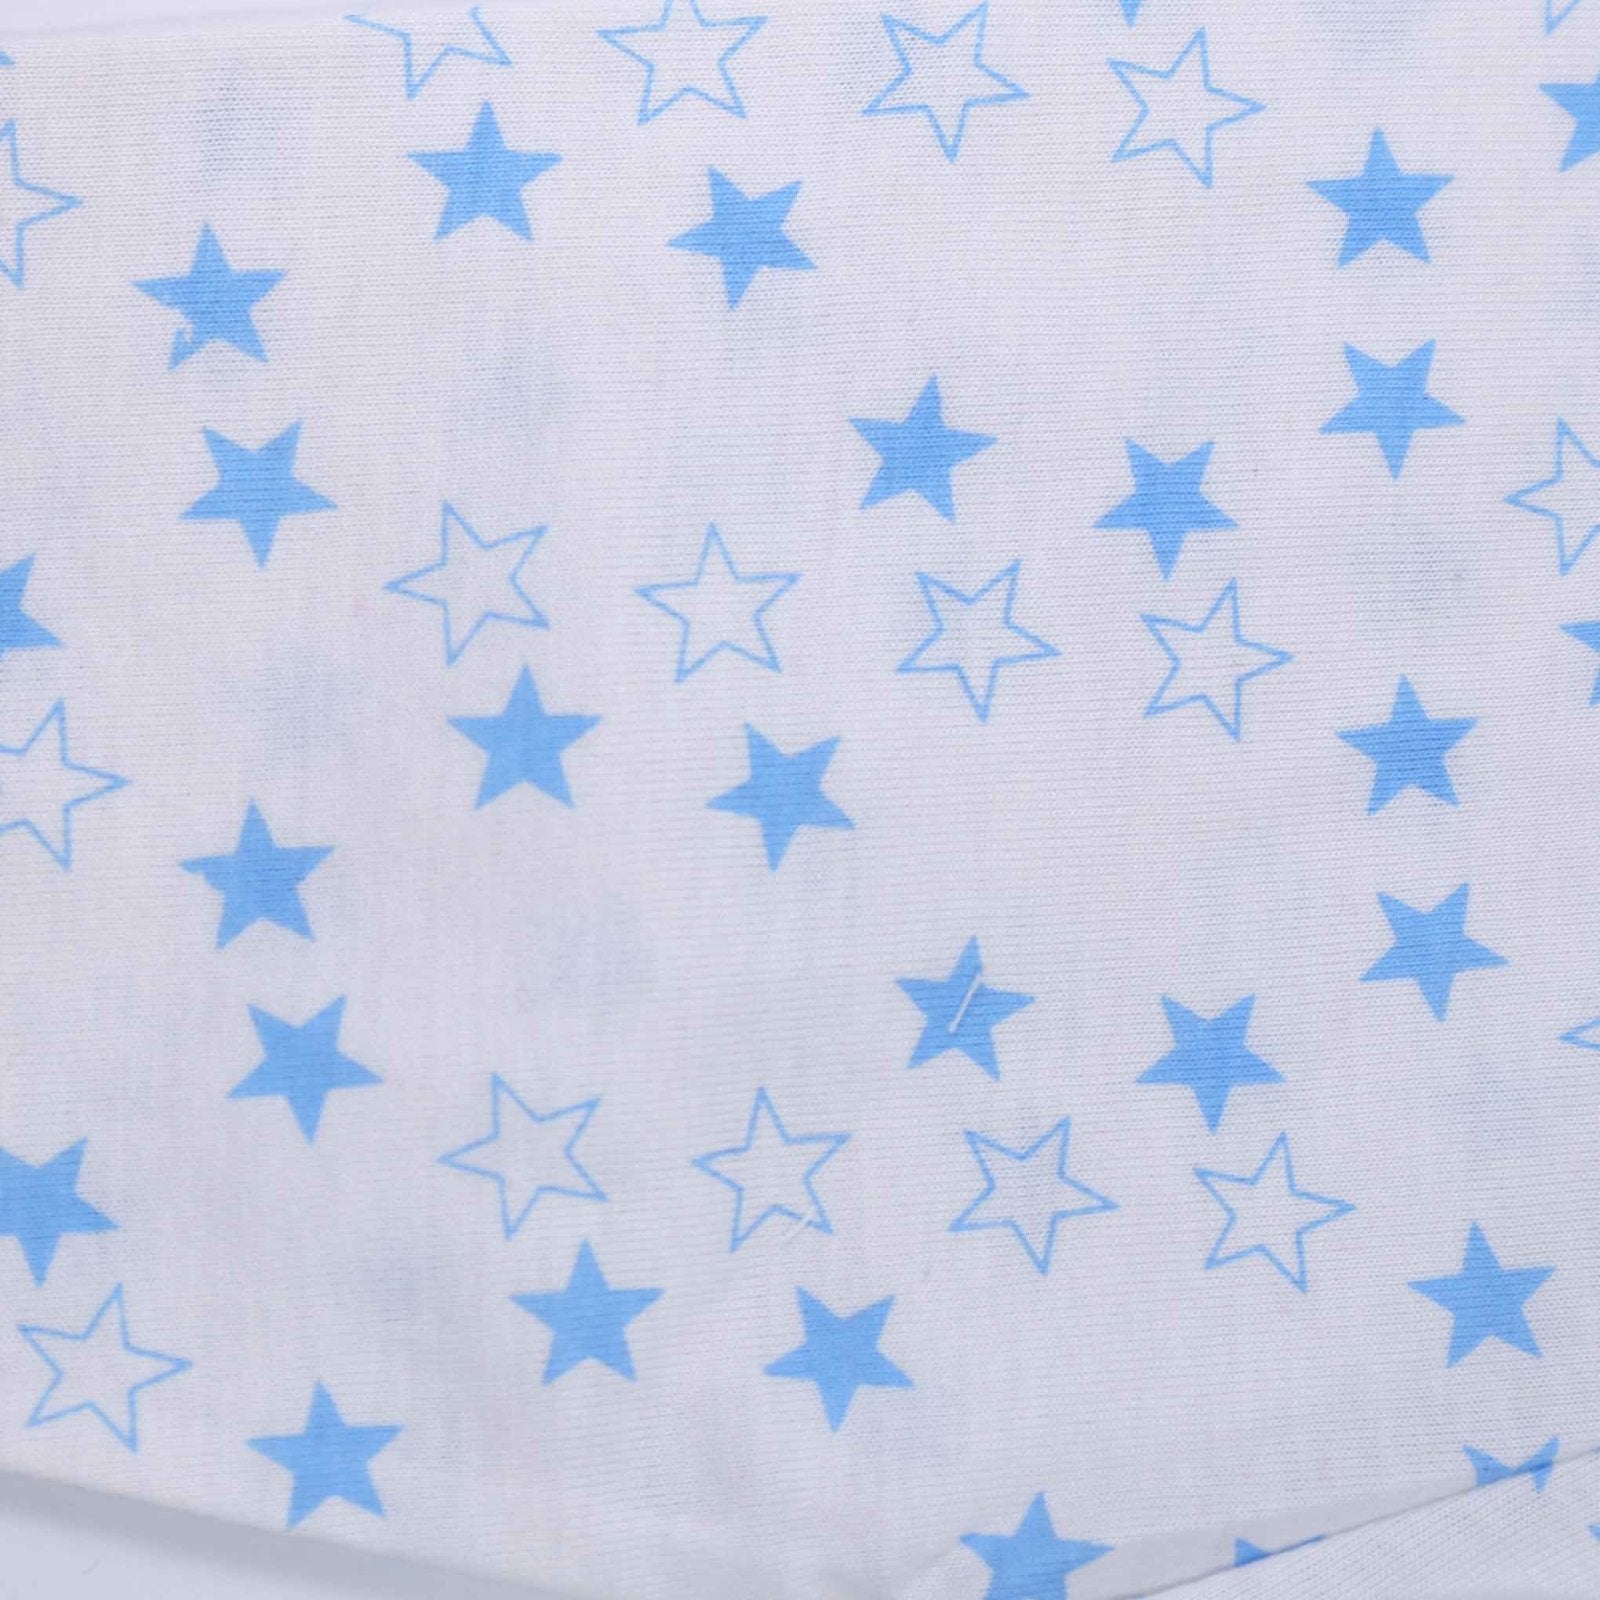 Pajama Set of 2 Blue Star Printed by Little Darling